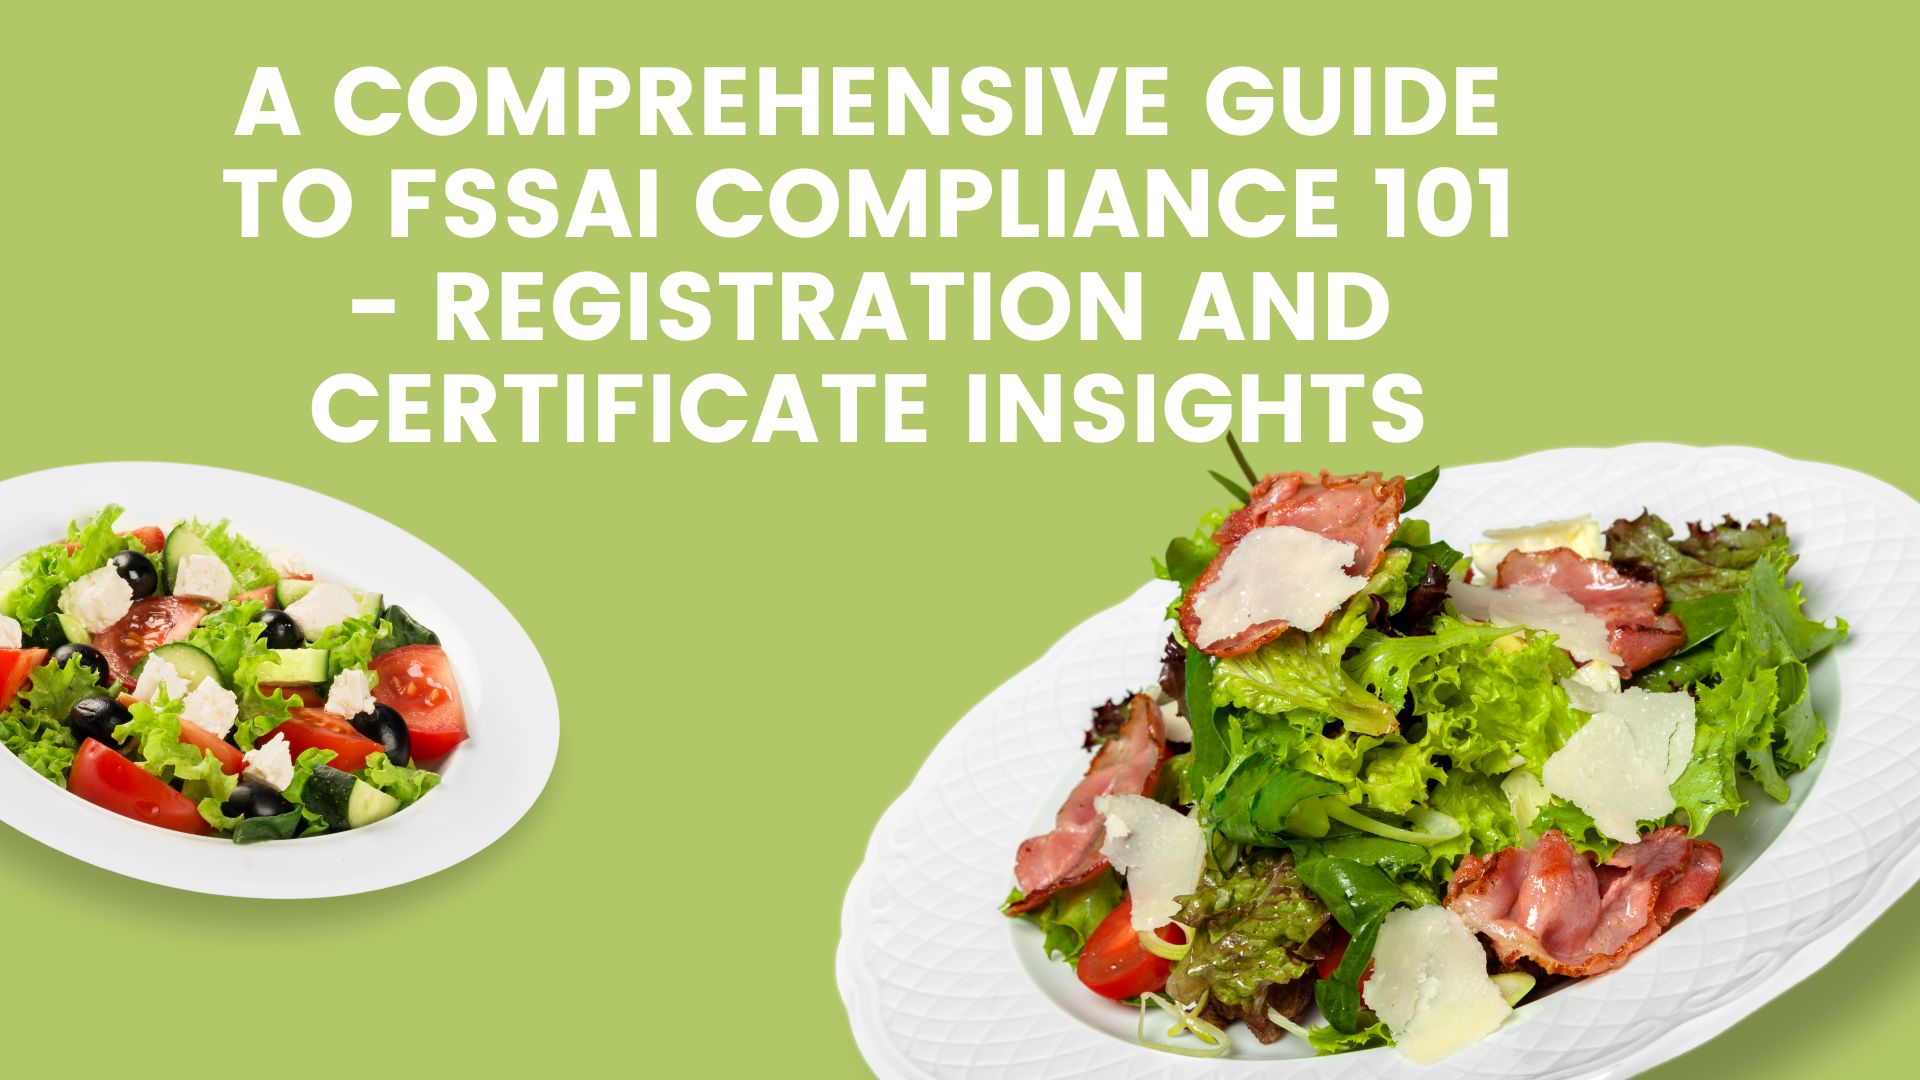 A Comprehensive Guide to FSSAI Compliance 101 - Registration and Certificate Insights